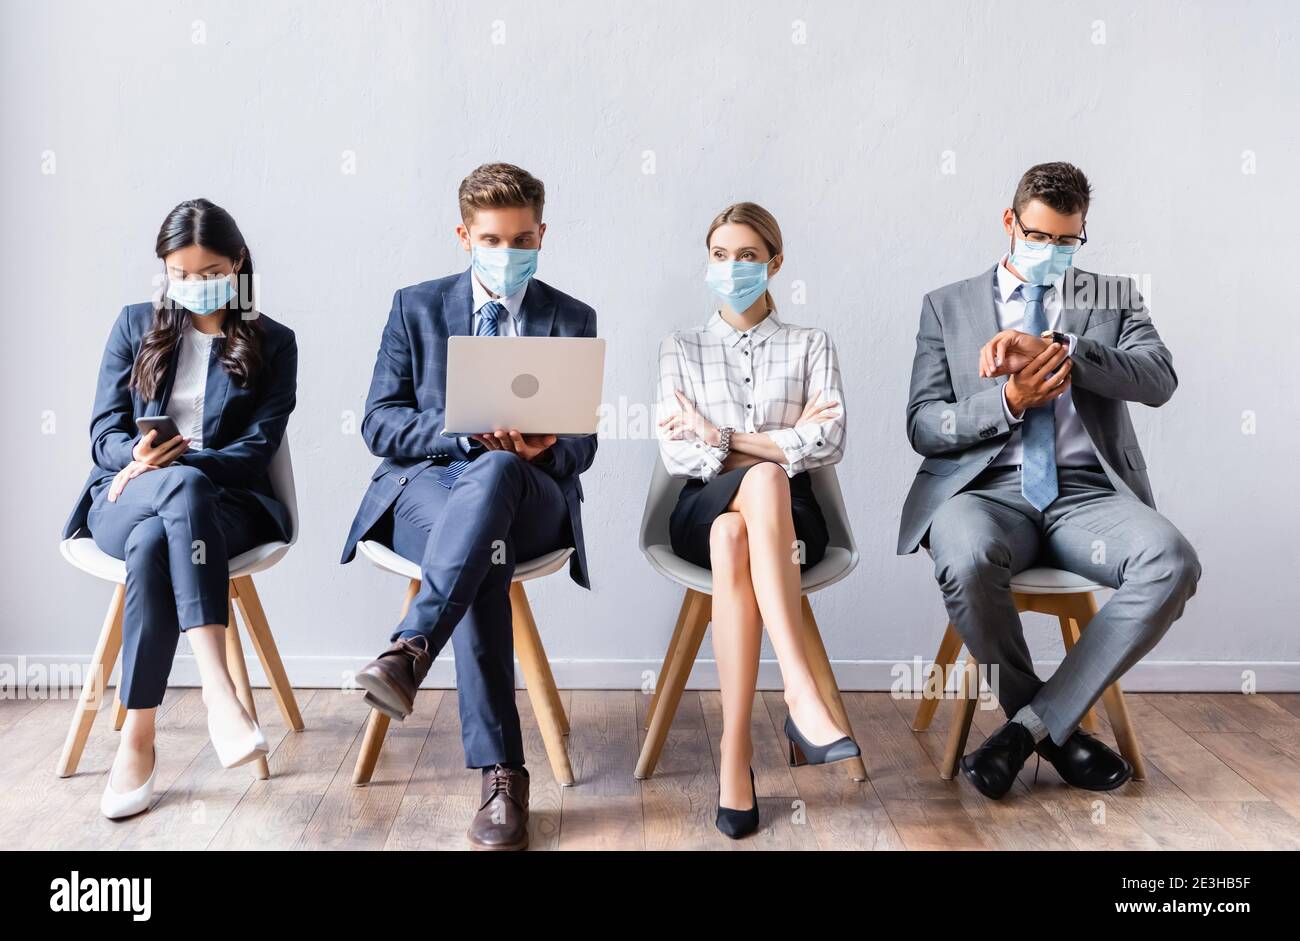 Multiethnic businesspeople in medical masks using devices before job interview Stock Photo